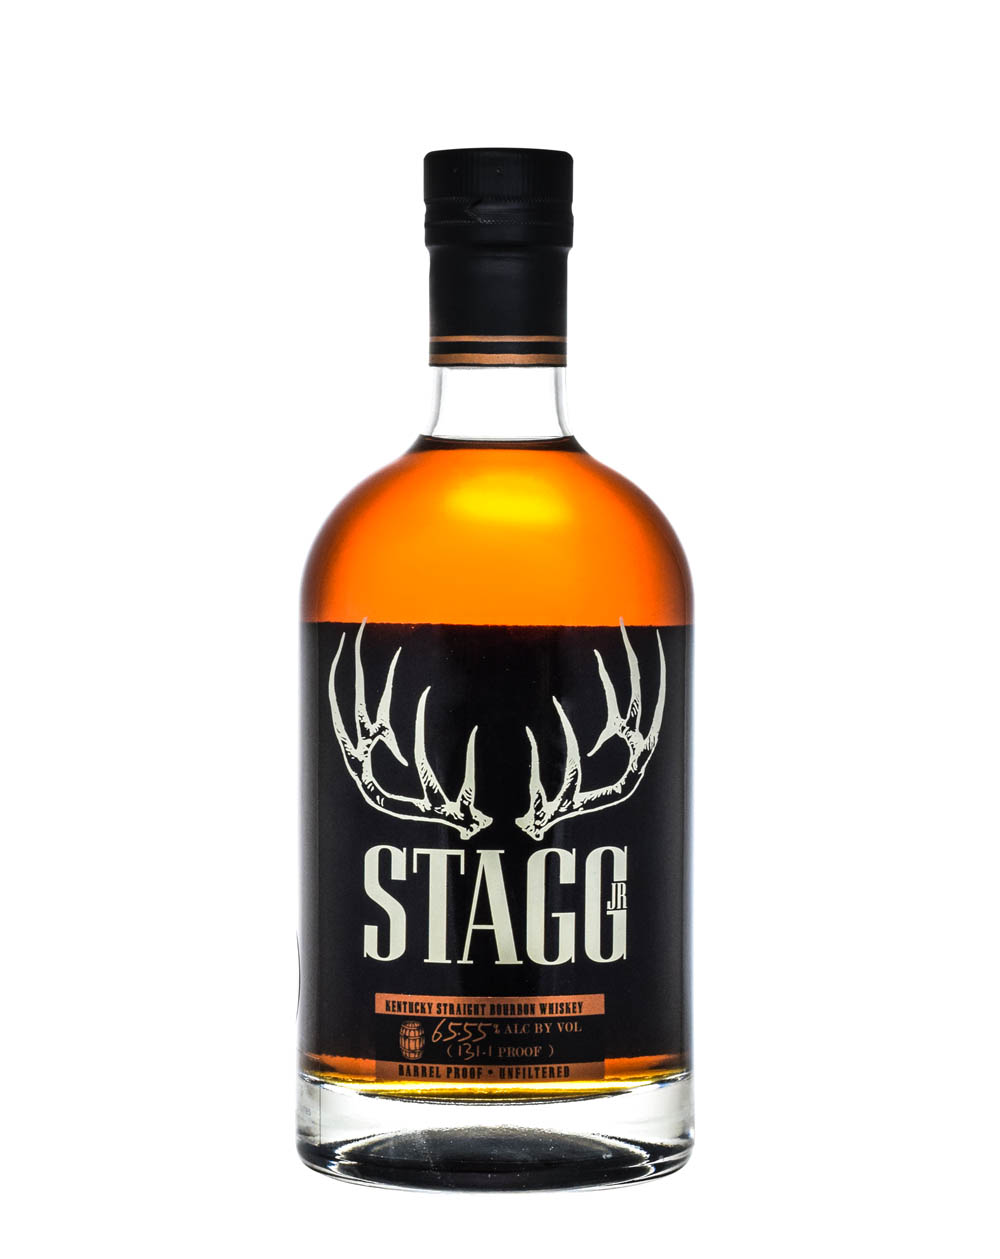 Stagg Jr Batch 15 131.1 Proof Musthave Malts MHM